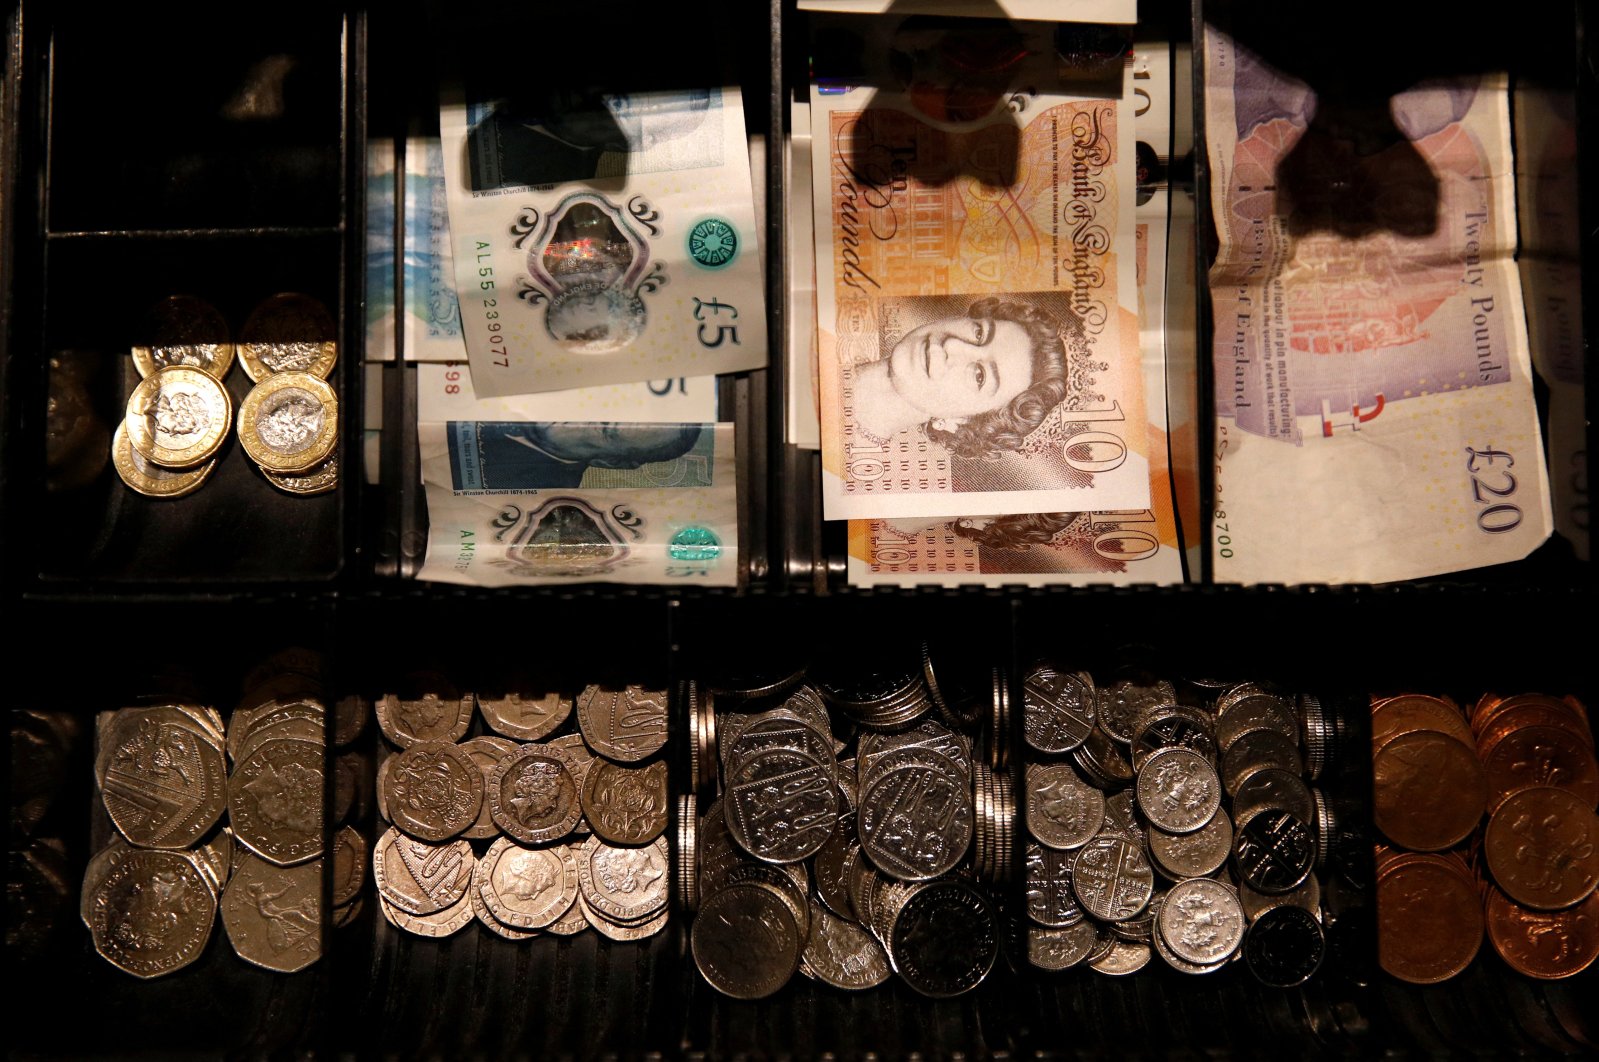 Pound sterling notes and change are seen inside a cash register in a coffee shop, Manchester, Britain, Sept. 21, 2018. (Reuters Photo)